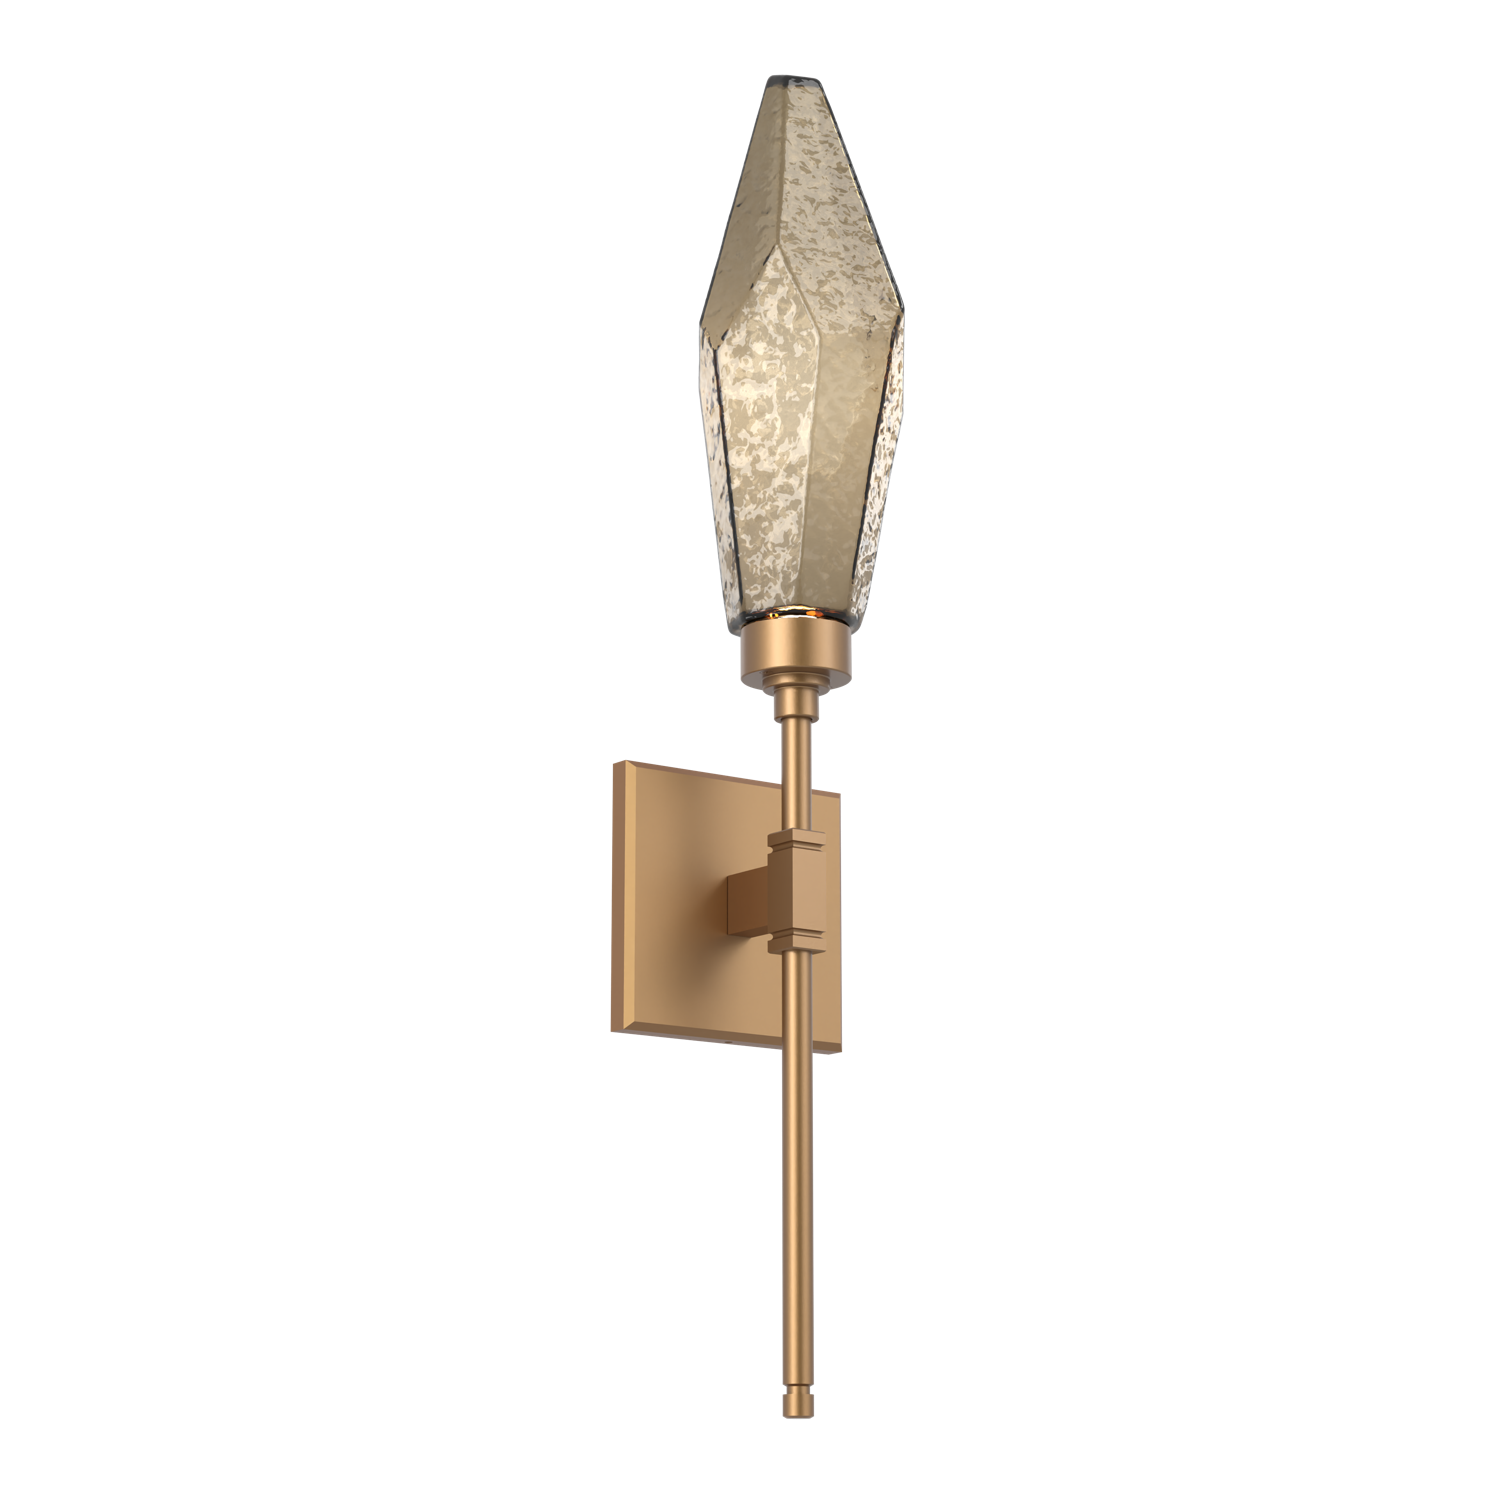 IDB0050-04-NB-CB-Hammerton-Studio-Rock-Crystal-ada-certified-belvedere-wall-sconce-with-novel-brass-finish-and-chilled-bronze-blown-glass-shades-and-LED-lamping